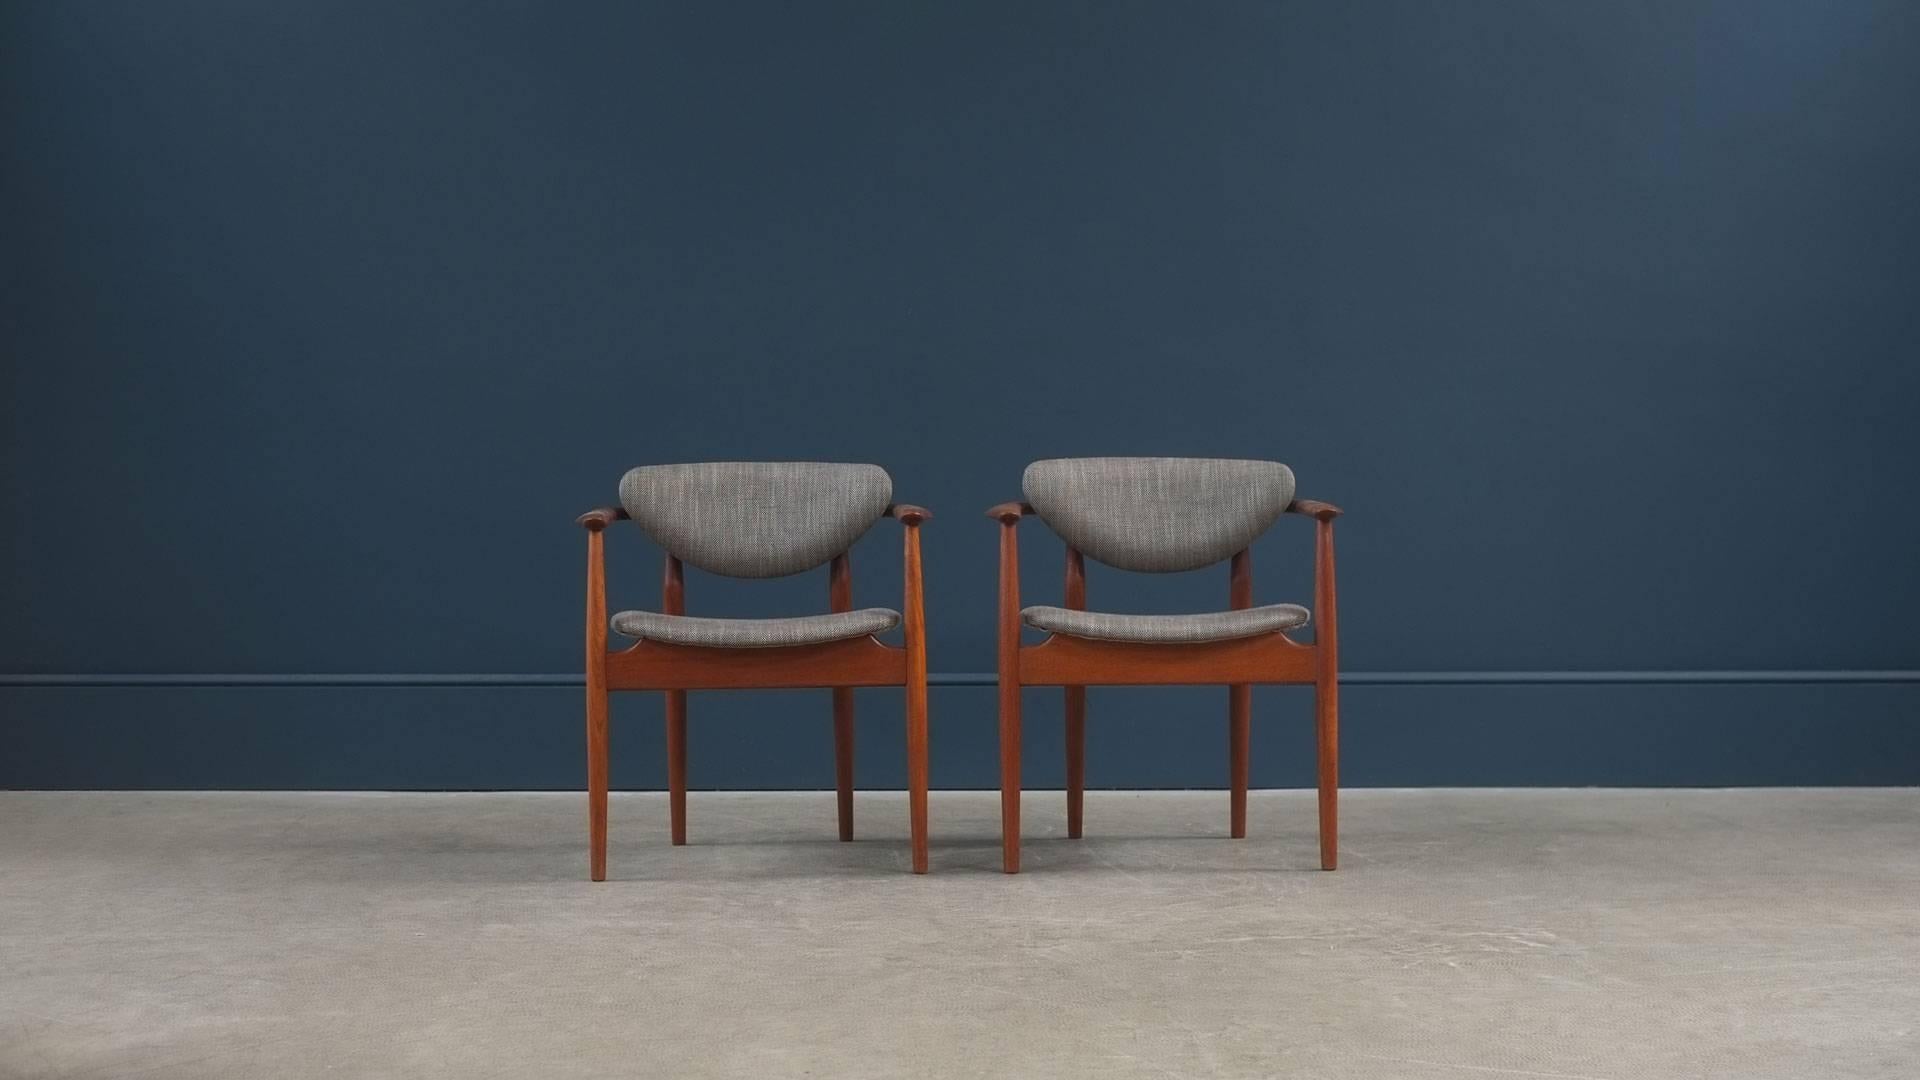 Beautiful and super rare armchairs designed by Finn Juhl for master cabinet maker Niels Vodder, Denmark, model NV55. Extremely sculptural armchairs in wonderful figured Burmese teak. Amazing pair of chairs.